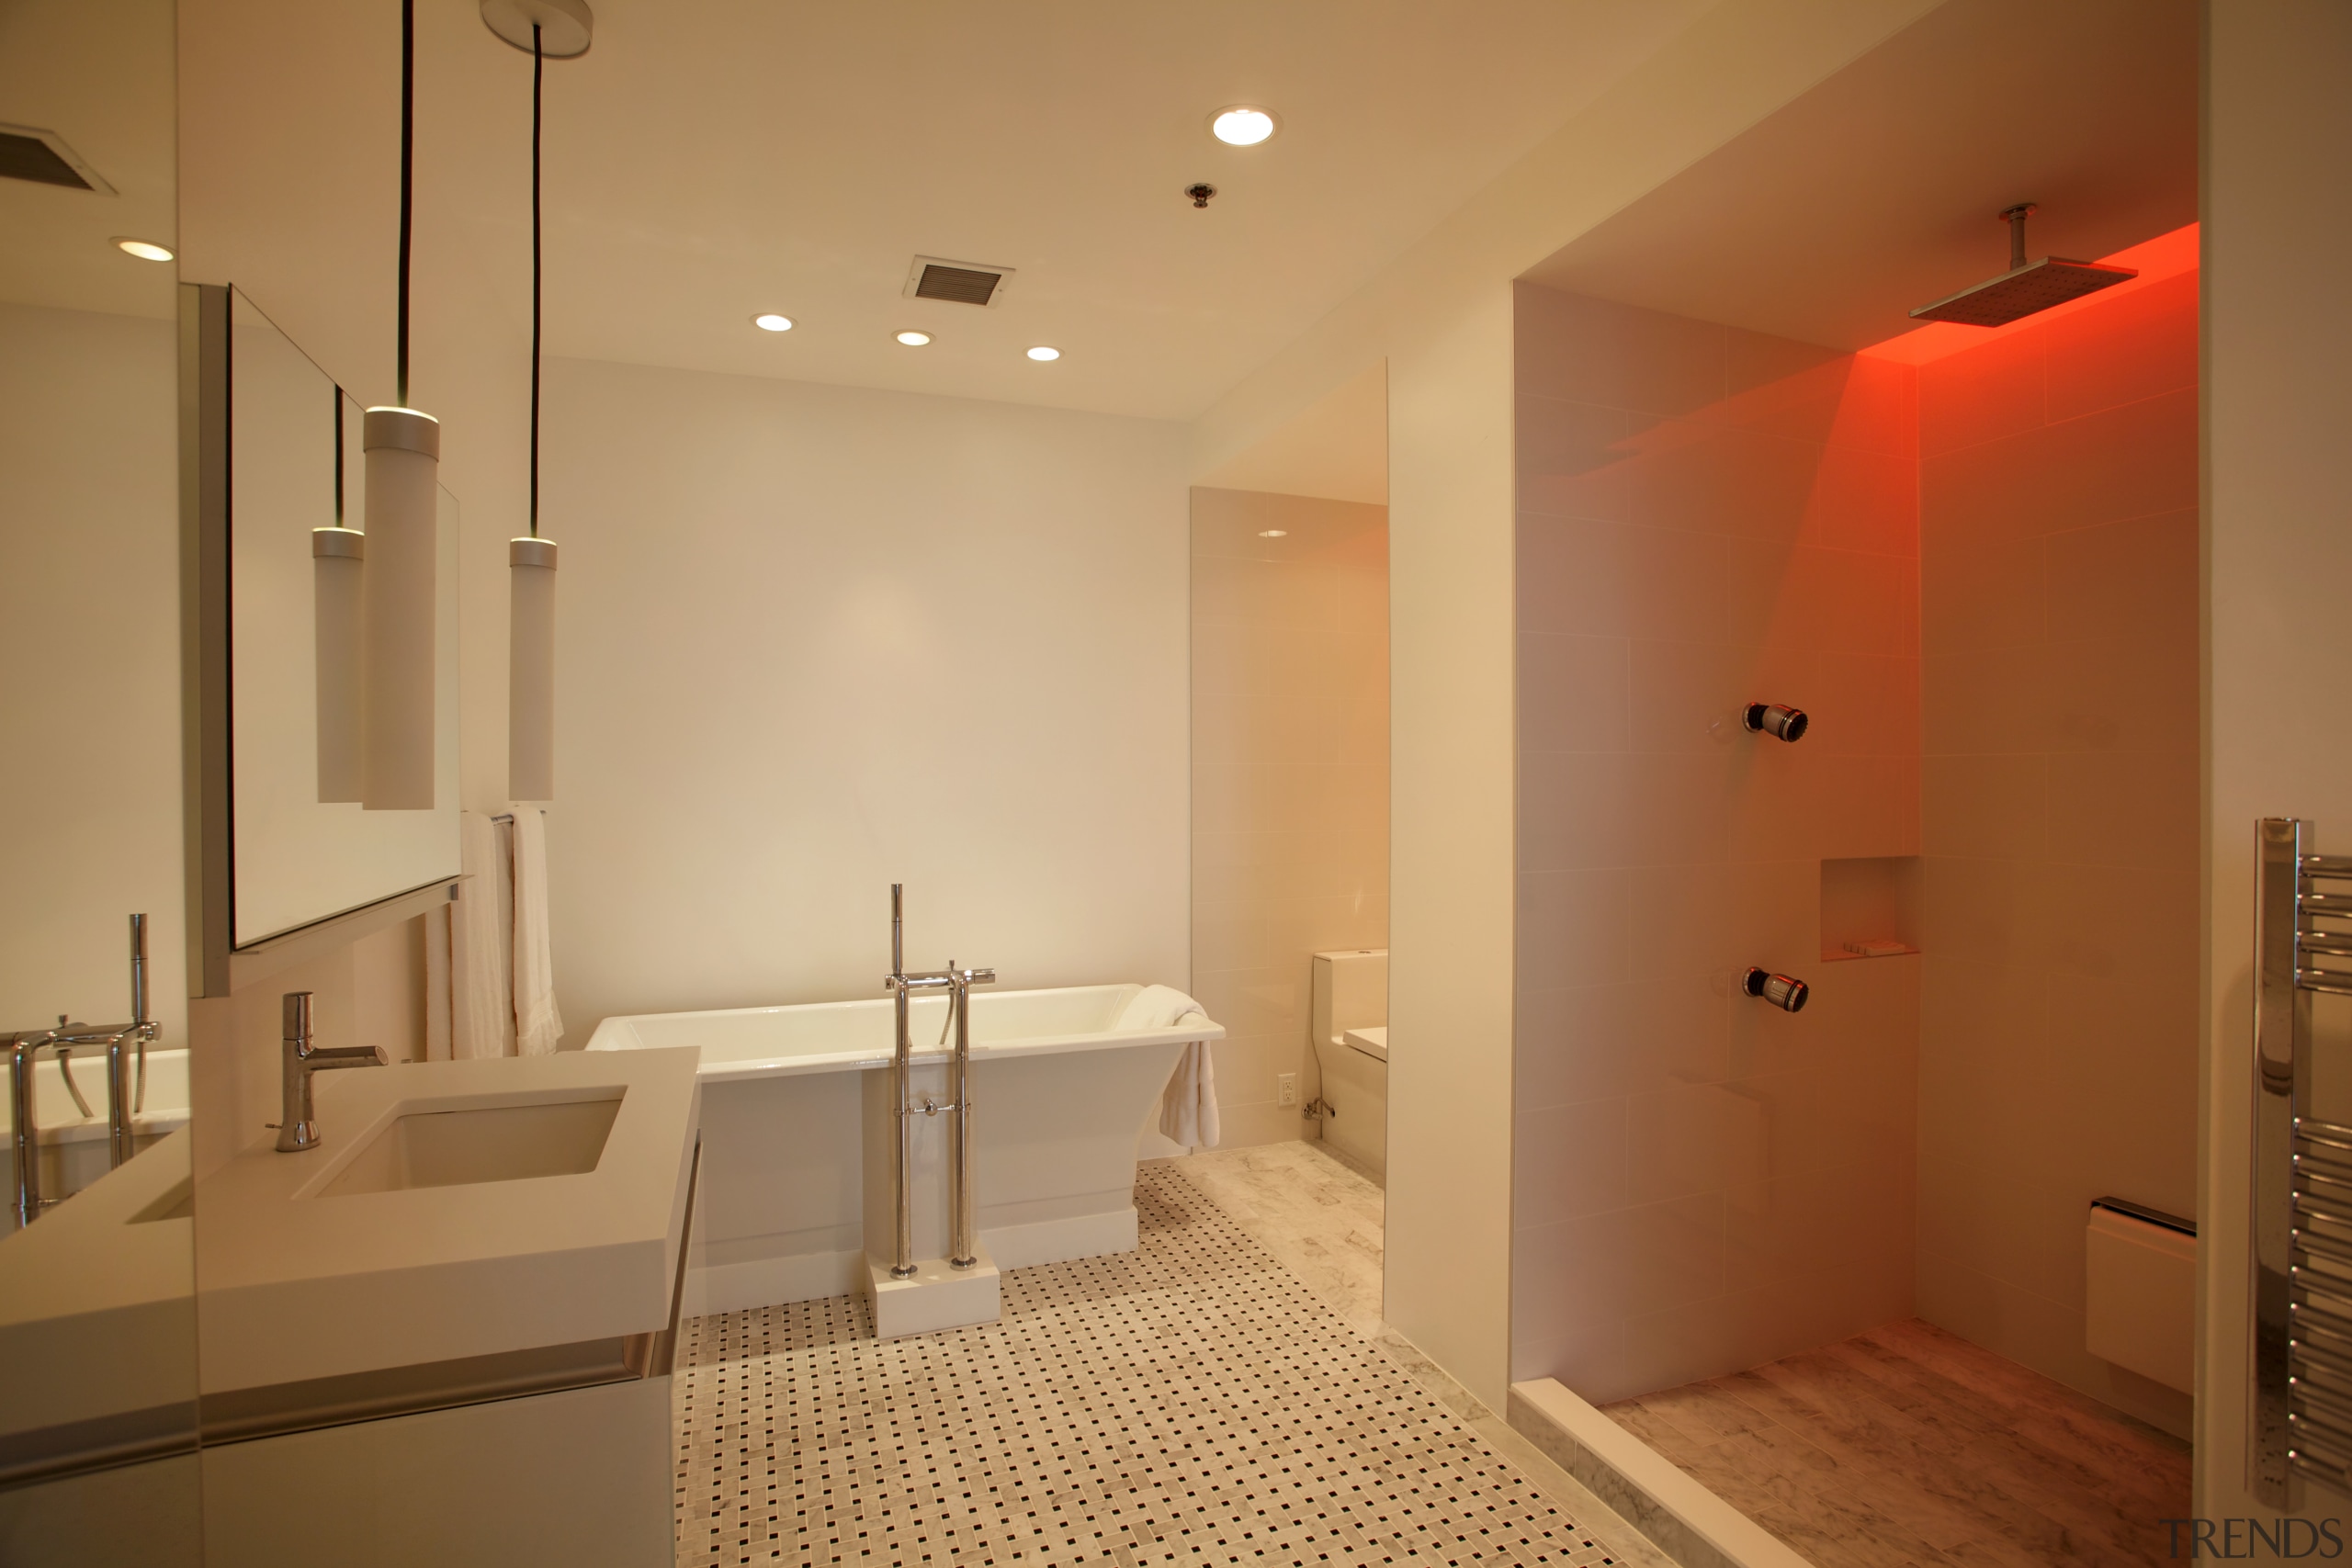 Red, green, blue  the shower offers chromatherapy, architecture, bathroom, ceiling, floor, flooring, home, interior design, lighting, real estate, room, brown, orange